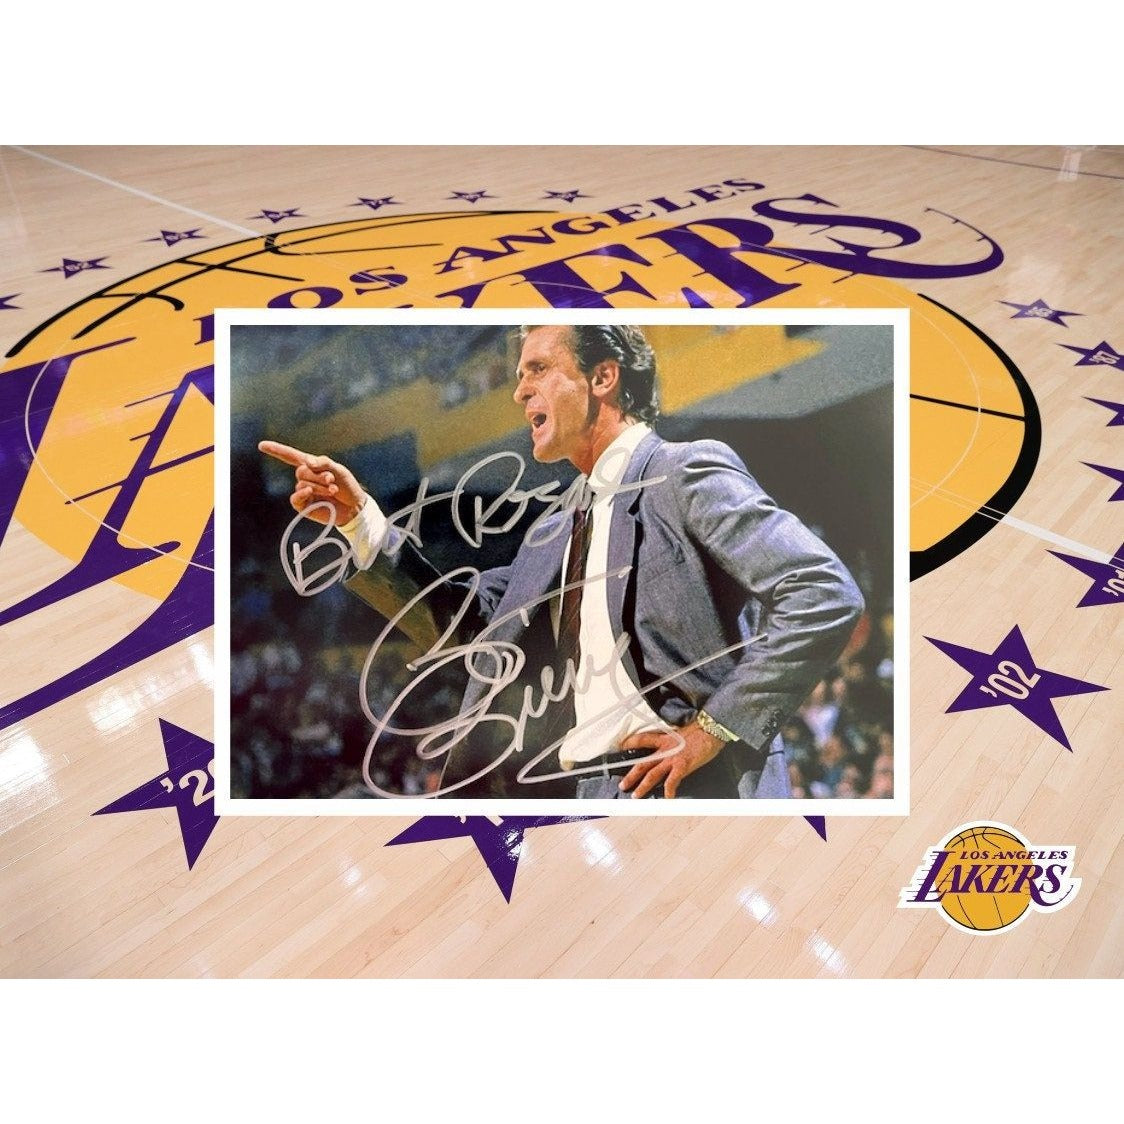 Pat Riley Los Angeles Lakers 5 x 7 photo signed